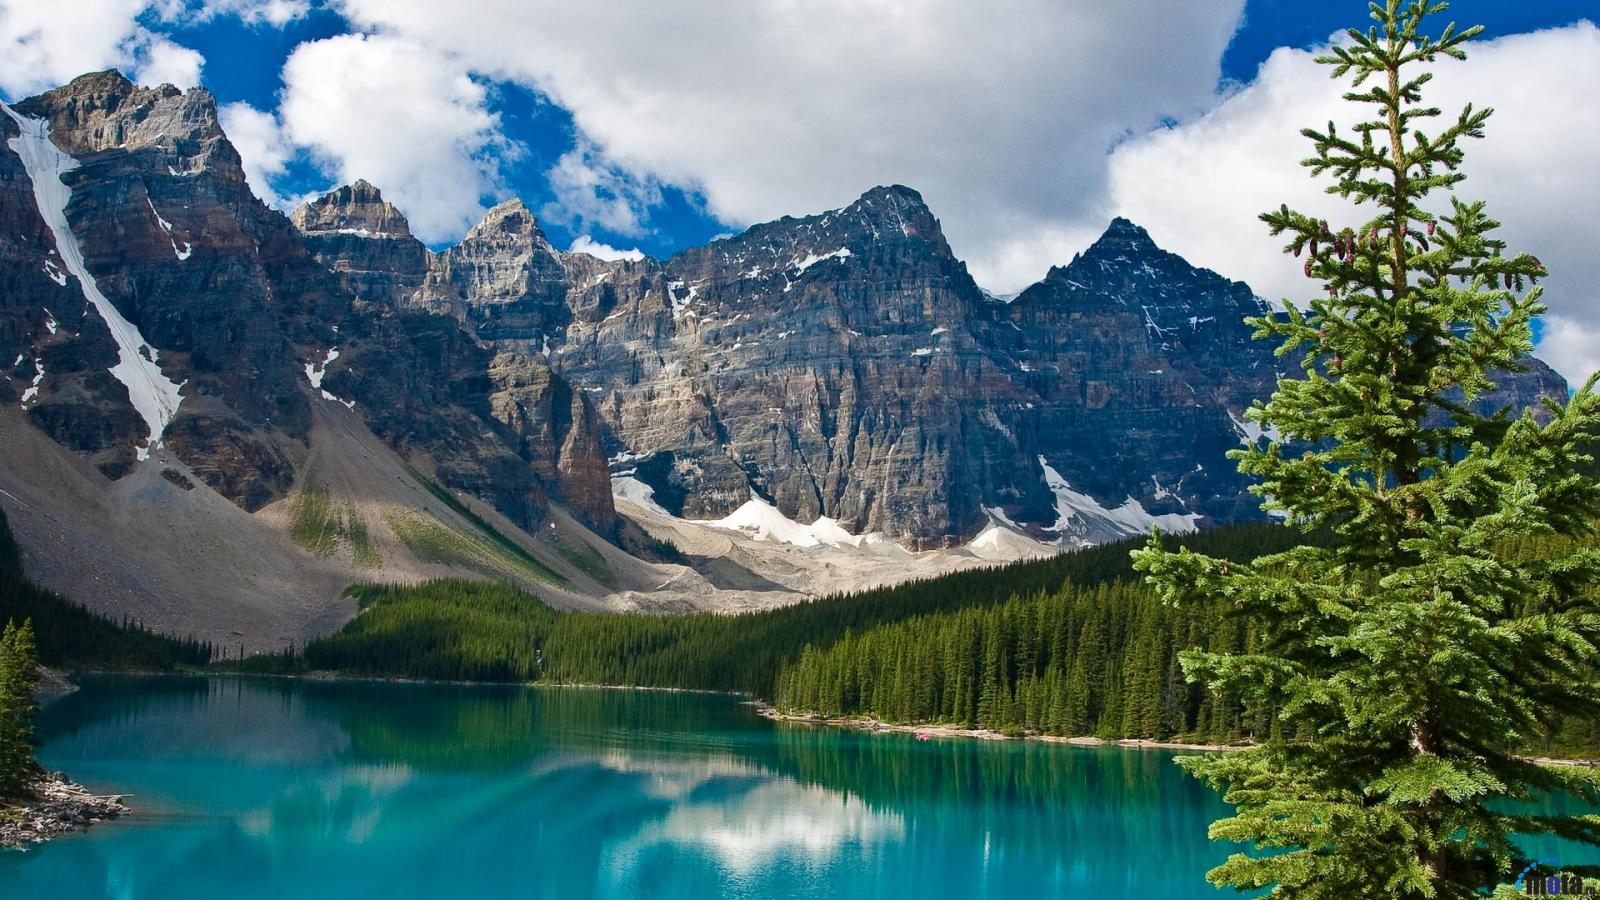 Download Wallpaper Blue lake and rocky mountains 1600 x 900 1600x900